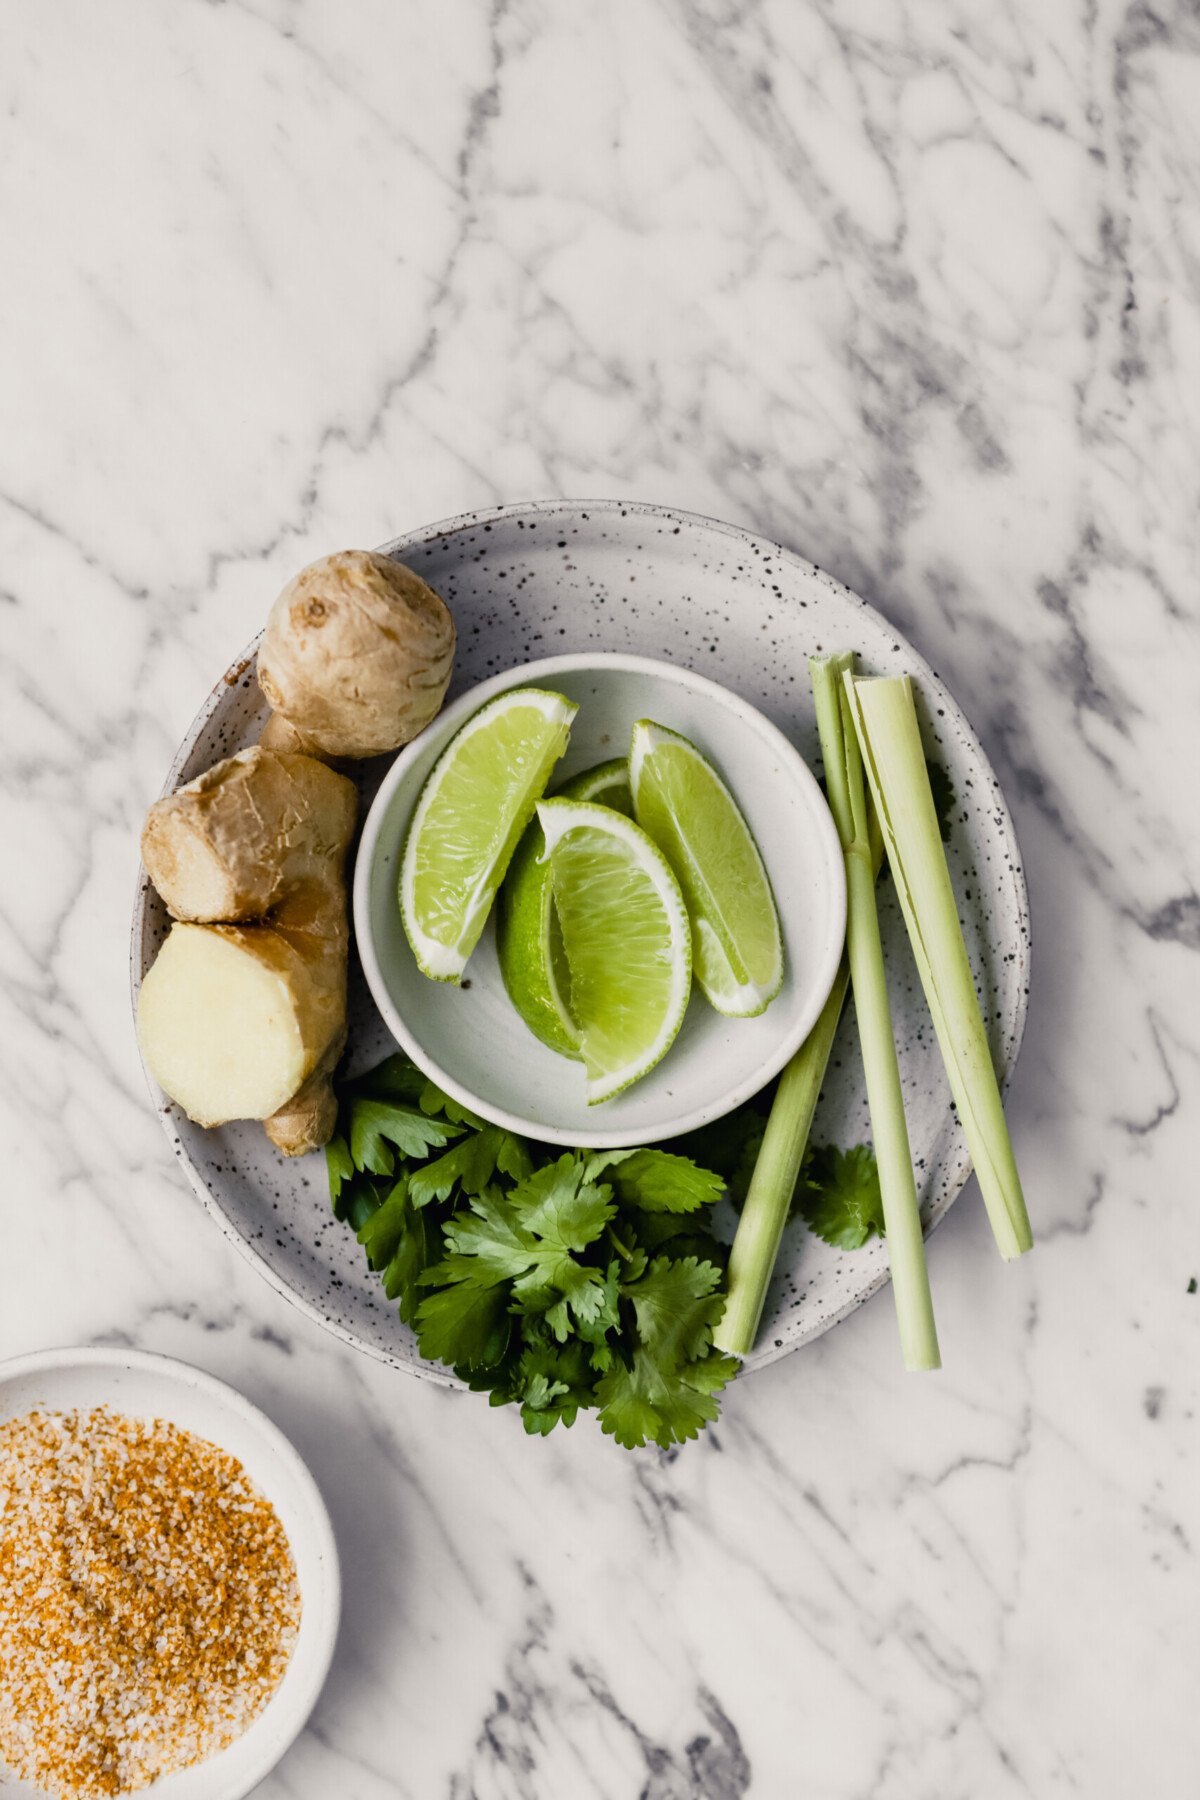 Photograph of ginger, lime wedges, lemongrass and fresh herbs arranged on a white speckled plate